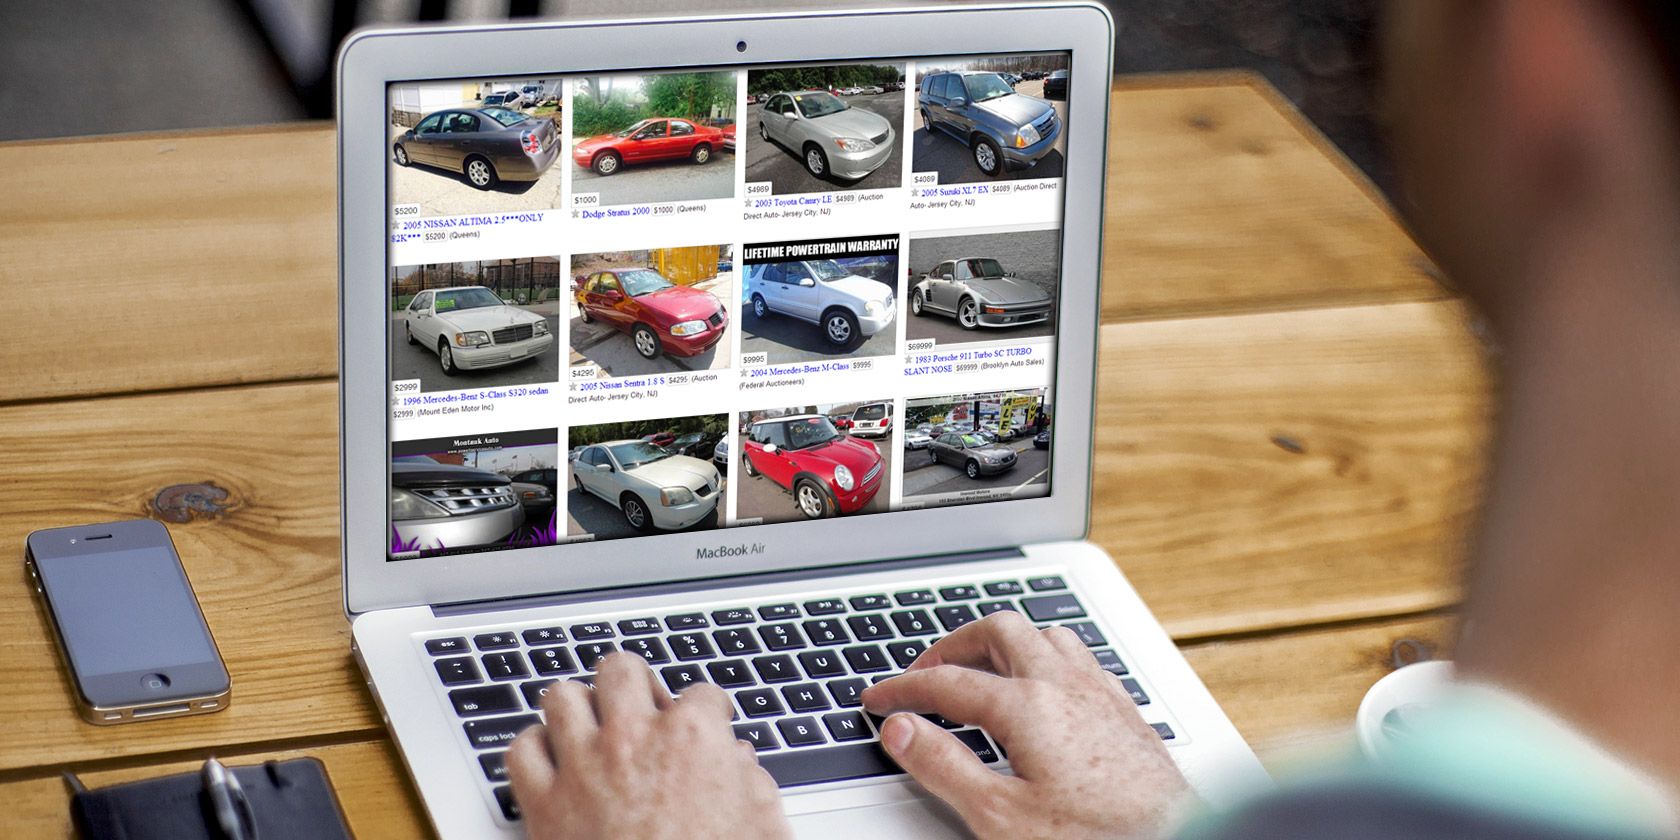 Here Is What You Should Know Before Buying Used Cars Online